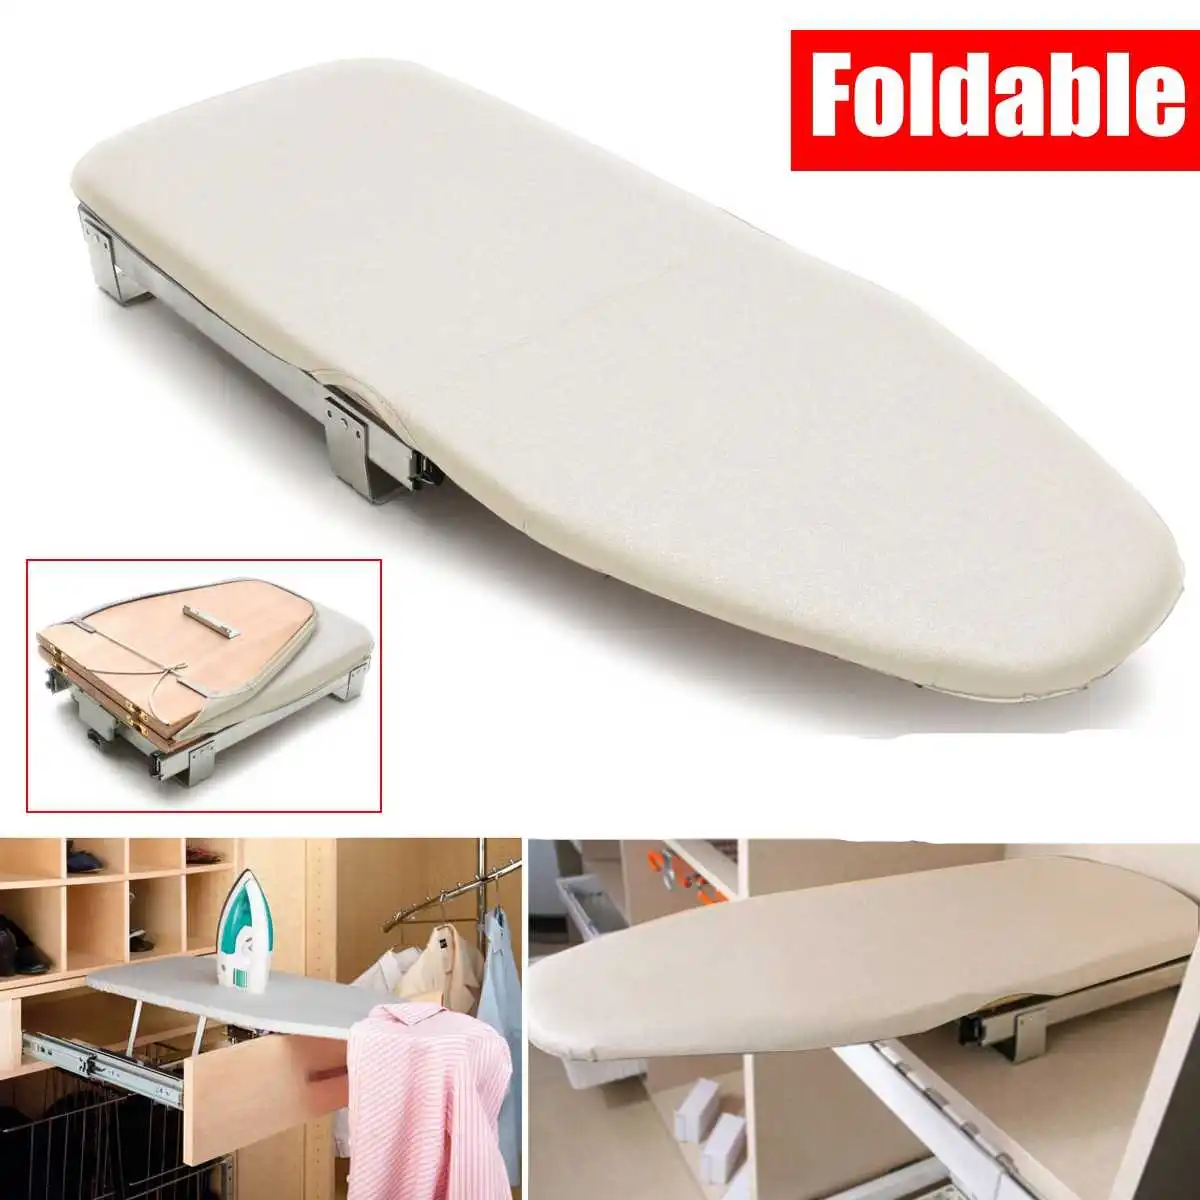 Wooden Ironing Board Pull Out Ironing Board Foldable Space Saving